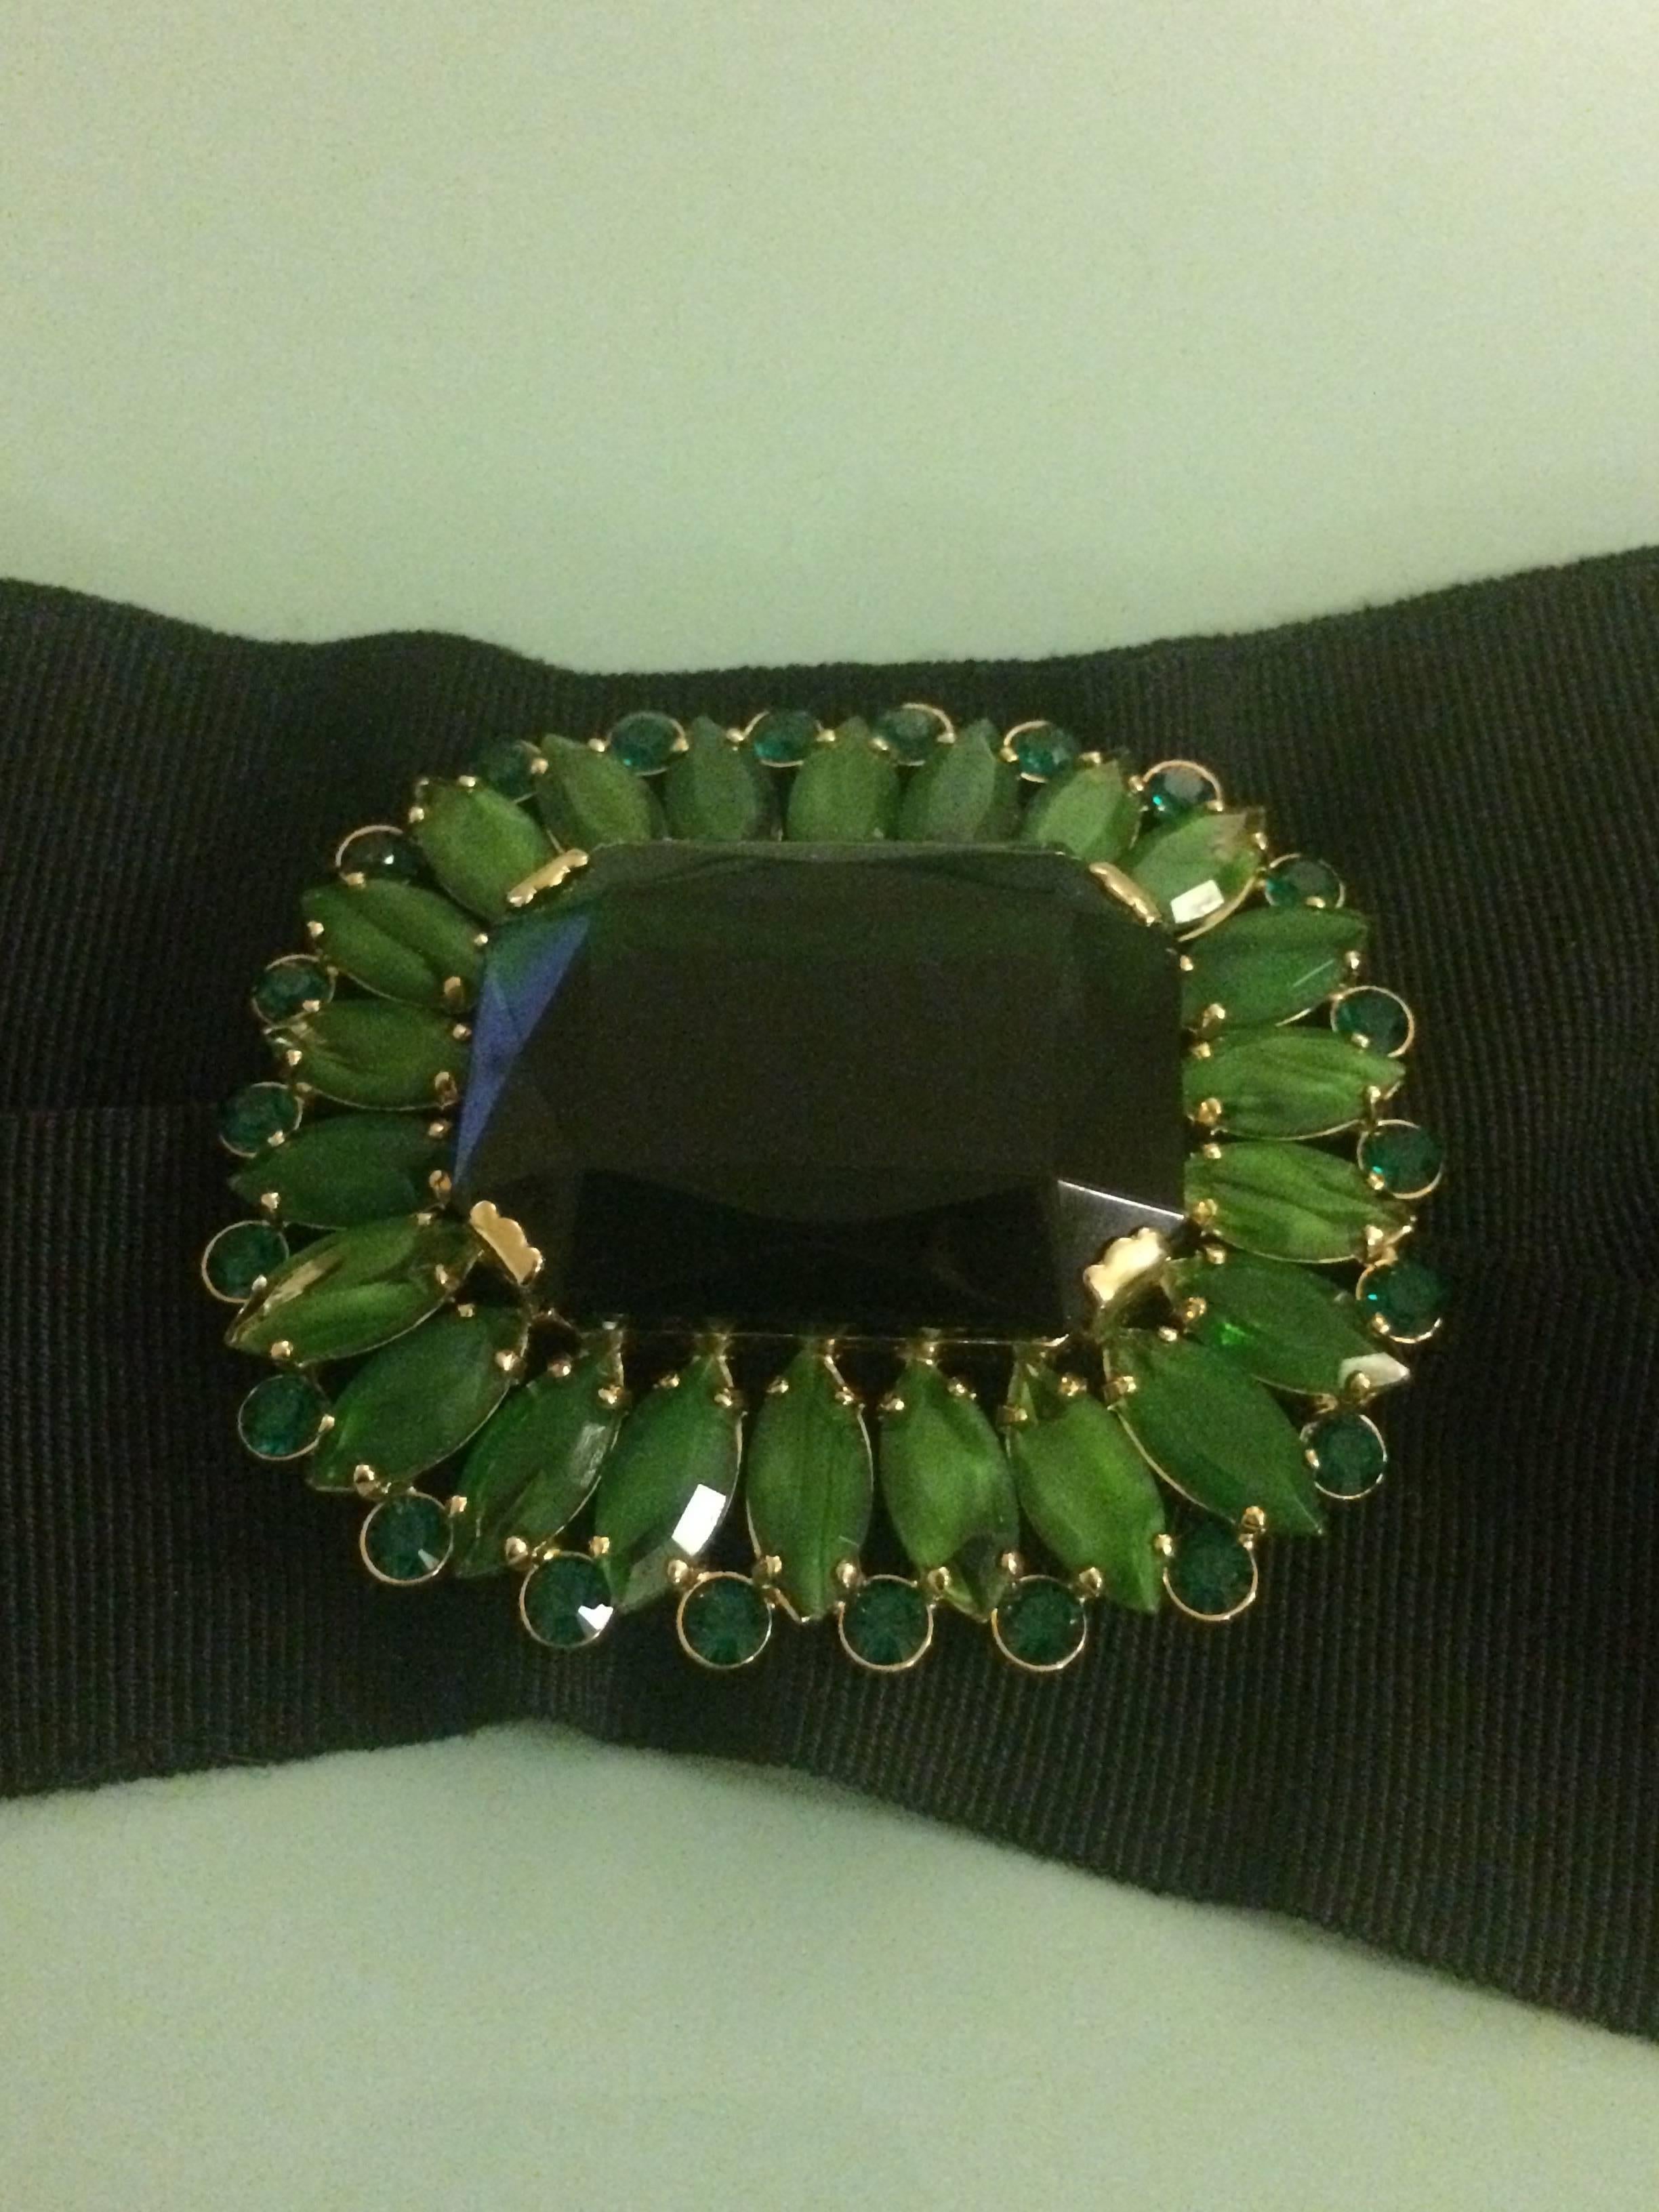 Dolce & Gabbana wide black grosgrain waist belt with green crystal and glass brooch embellishment at front. Closes with three concealed snaps at back. Brooch can be detached (it's held on by a couple stitches) and worn separately with it's own